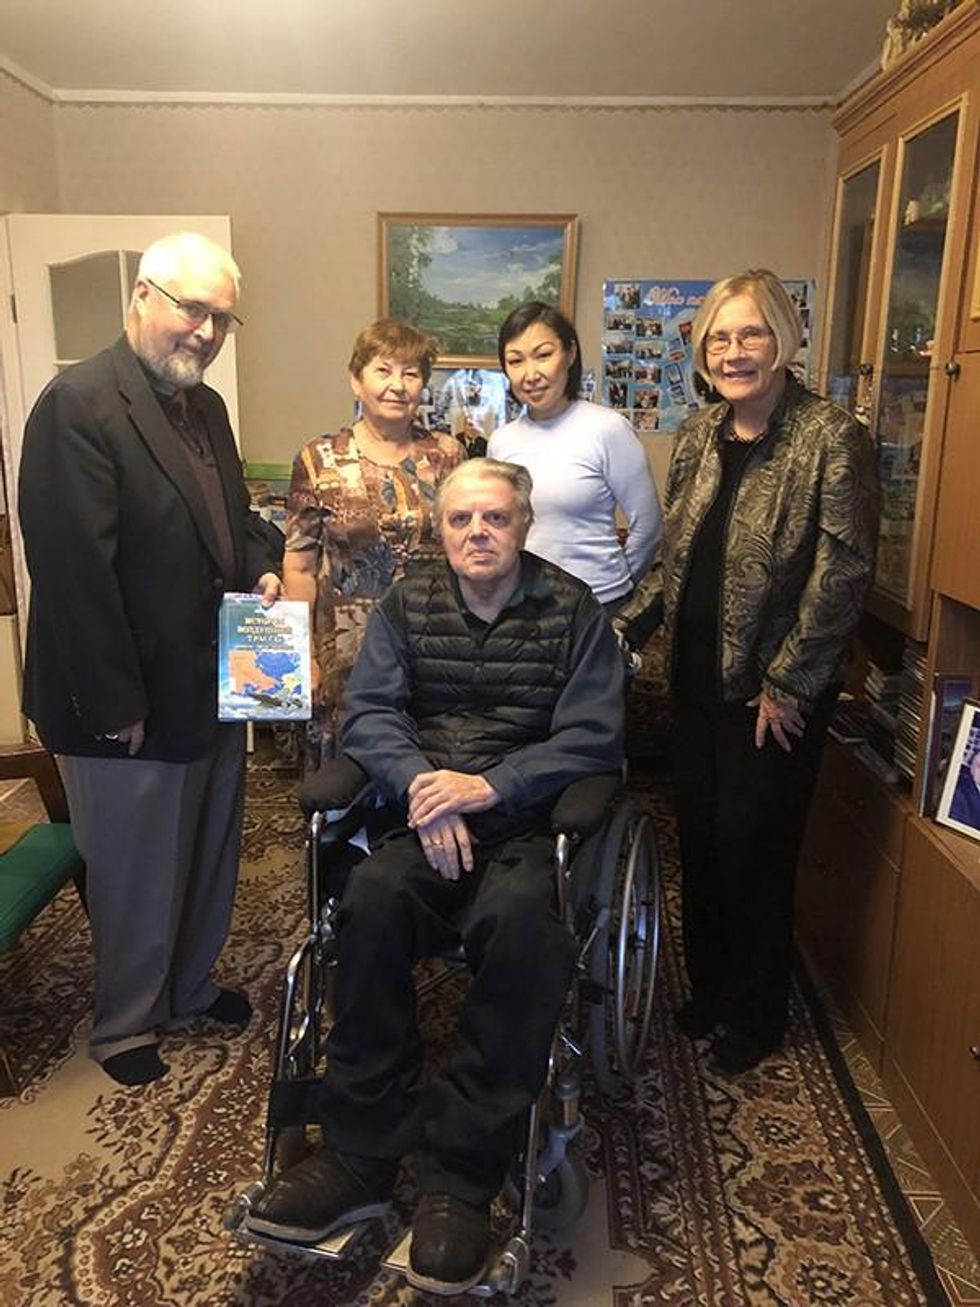 Photo by Ann Wright.  Author in center, Ivan Efimovich Negenblys; Left to right- Rotarian and host Pete Clark, researcher and Ivan's wife Galina; host and Rotarian Katya Allekseeva; Ann Wright